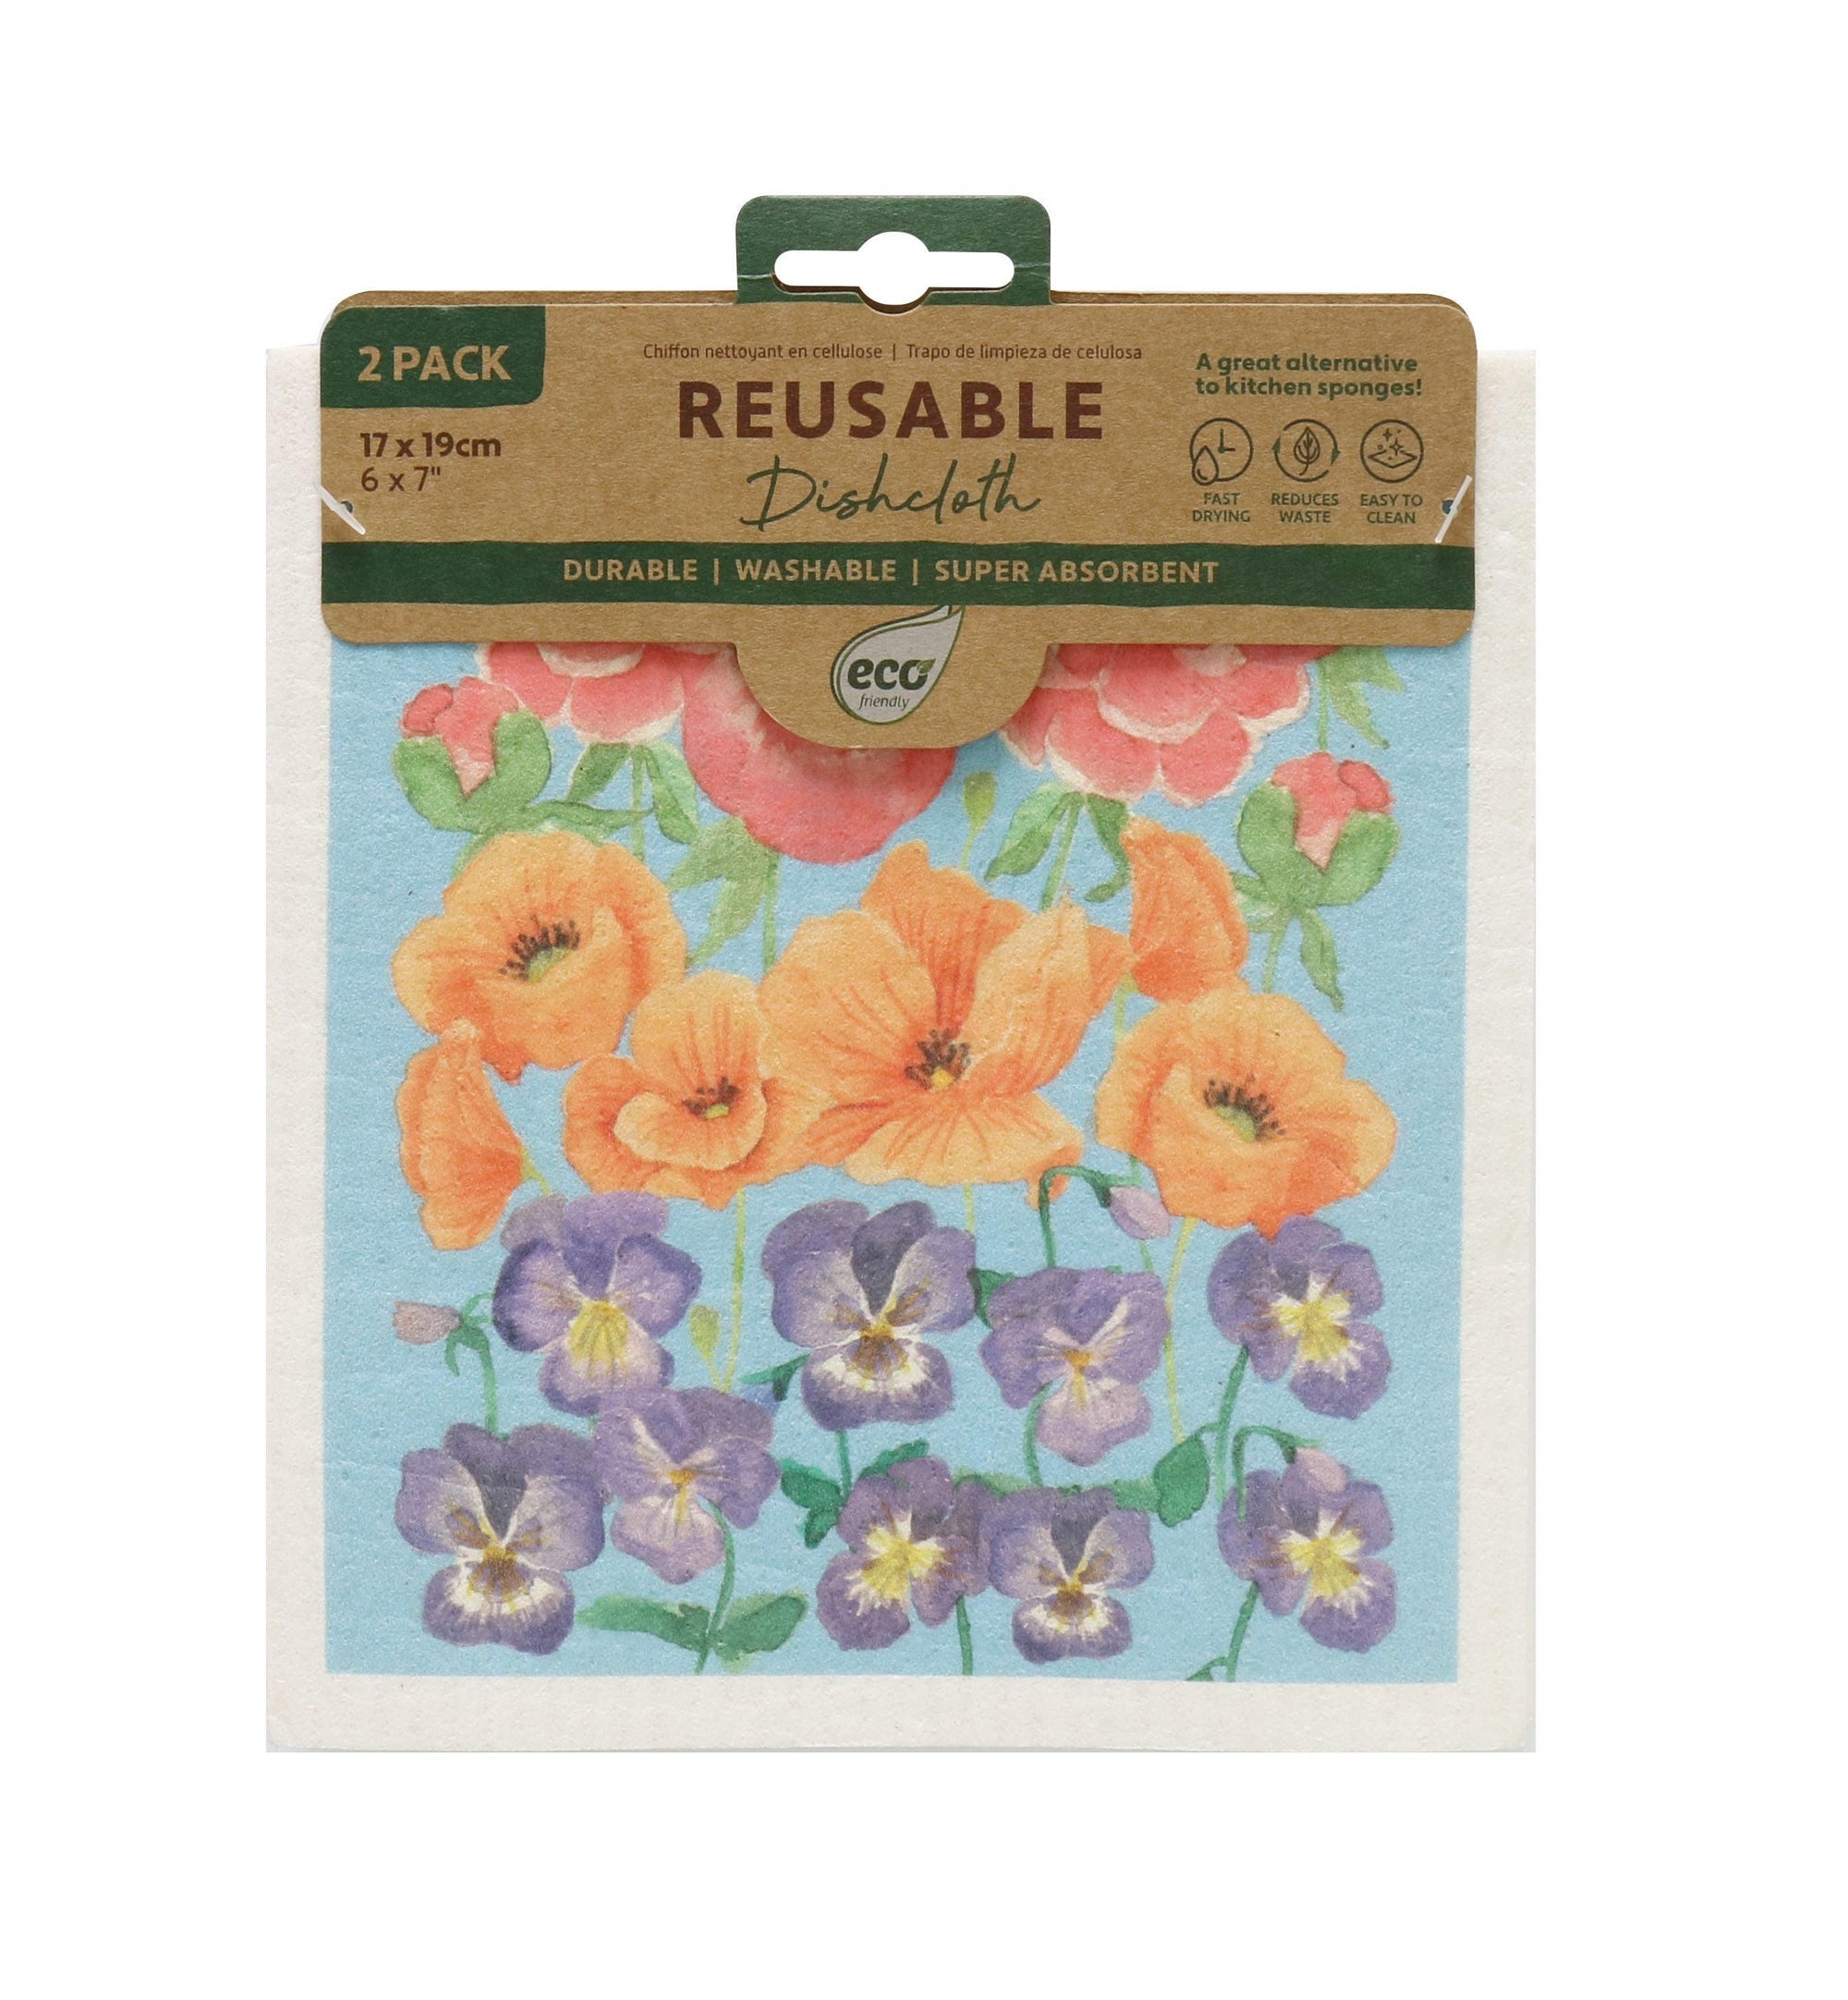 UBL Reusable Cellulose Dish Cloth | Pack of 2 - Choice Stores